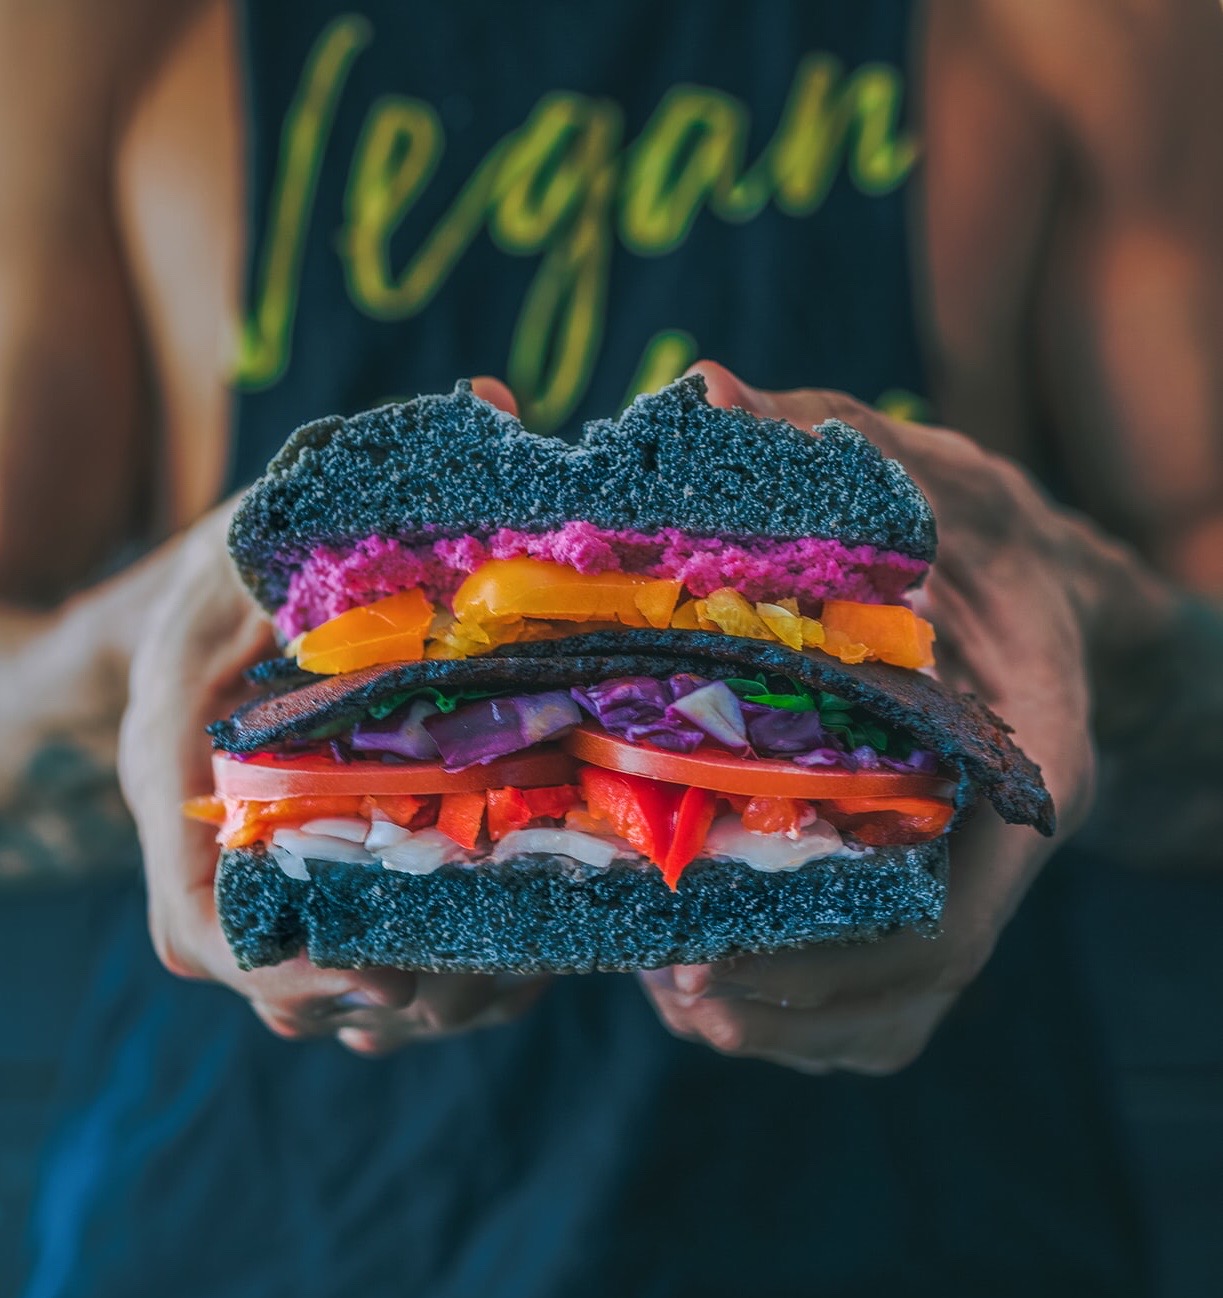 Recent years have seen rapid adoption of vegan diets and more meat-free products making their way onto shelves. As the dialog around veganism shifts from one of animal welfare, to wider concerns around climate change and personal health, we are seeing more and more people adopt this once minority dietary preference.